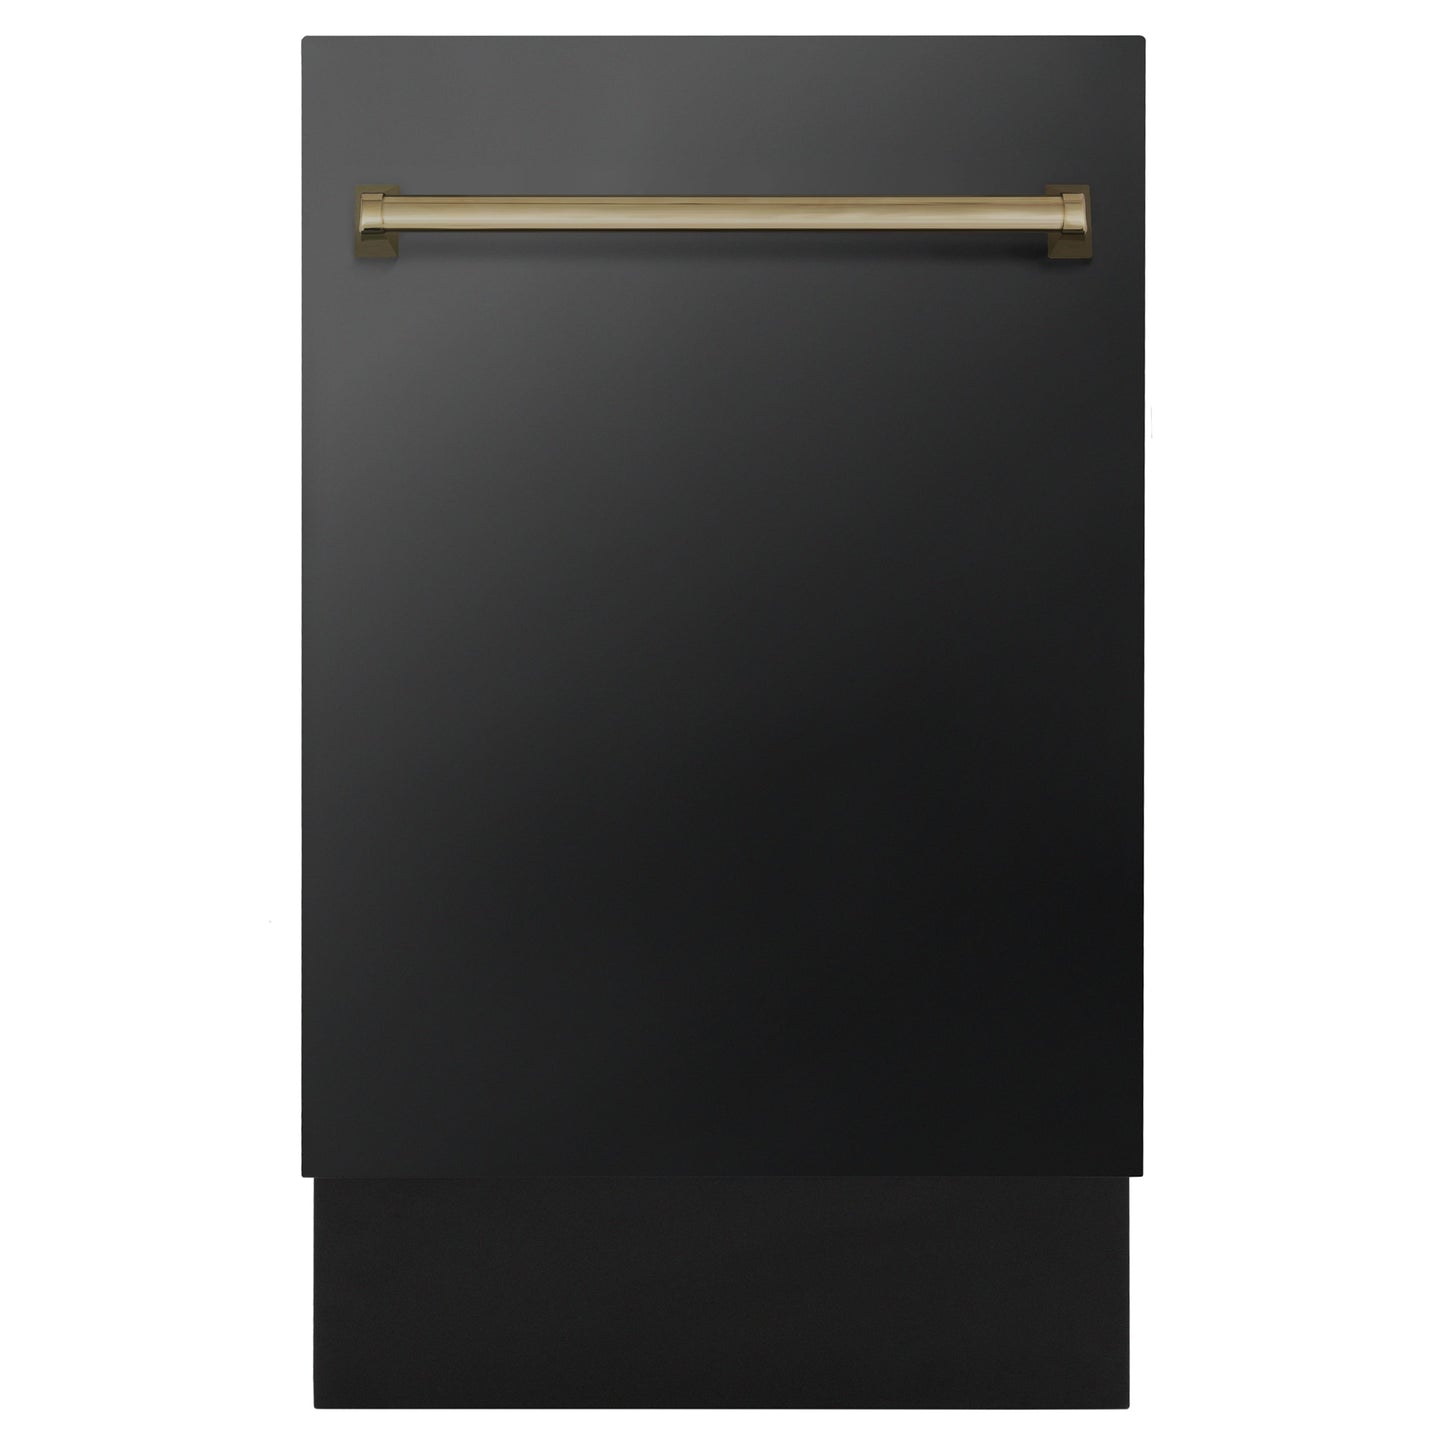 ZLINE Autograph Edition 18” Compact 3rd Rack Top Control Dishwasher in Black Stainless Steel with Champagne Bronze Accent Handle, 51dBa (DWVZ-BS-18-CB)